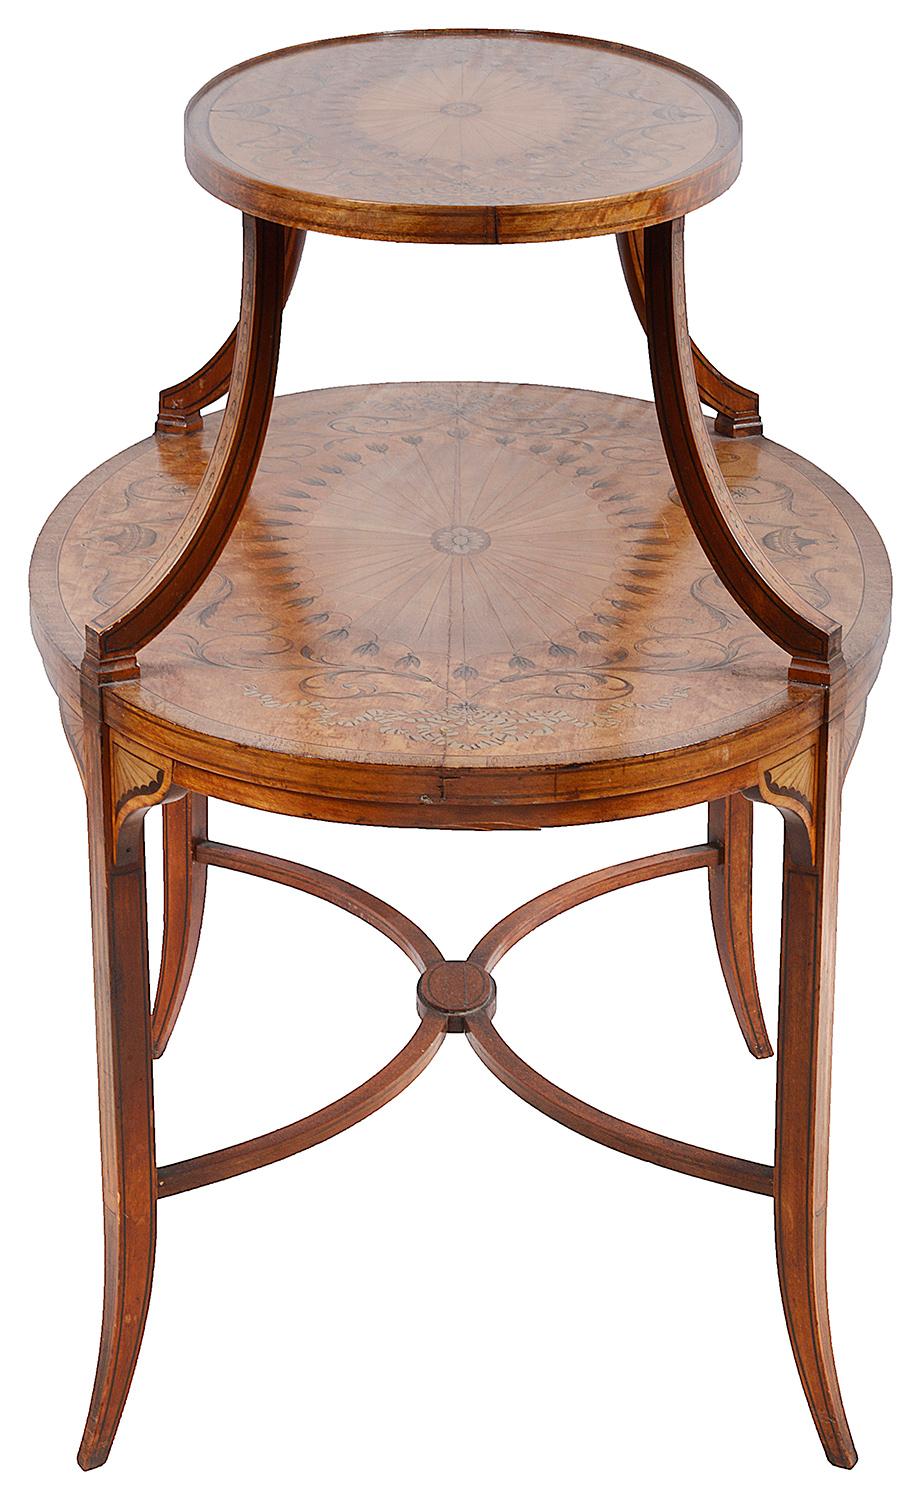 Sheraton Satinwood Inlaid Two-Tier Side Table, 19th Century